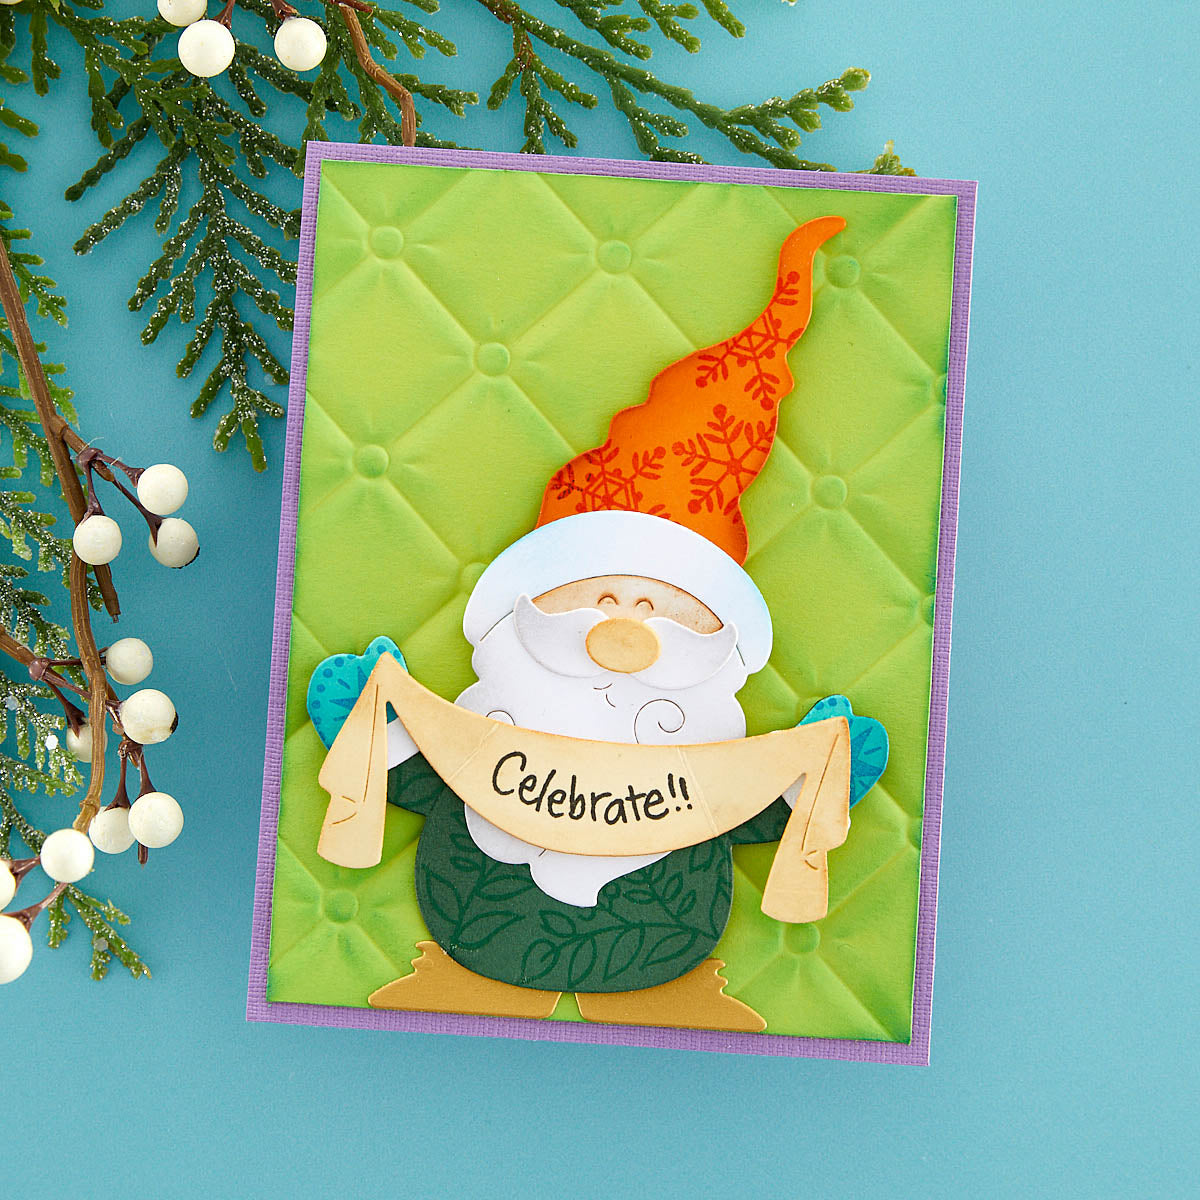 Gnome Hugs Etched Dies from the Holiday Hugs Collection by Stampendous